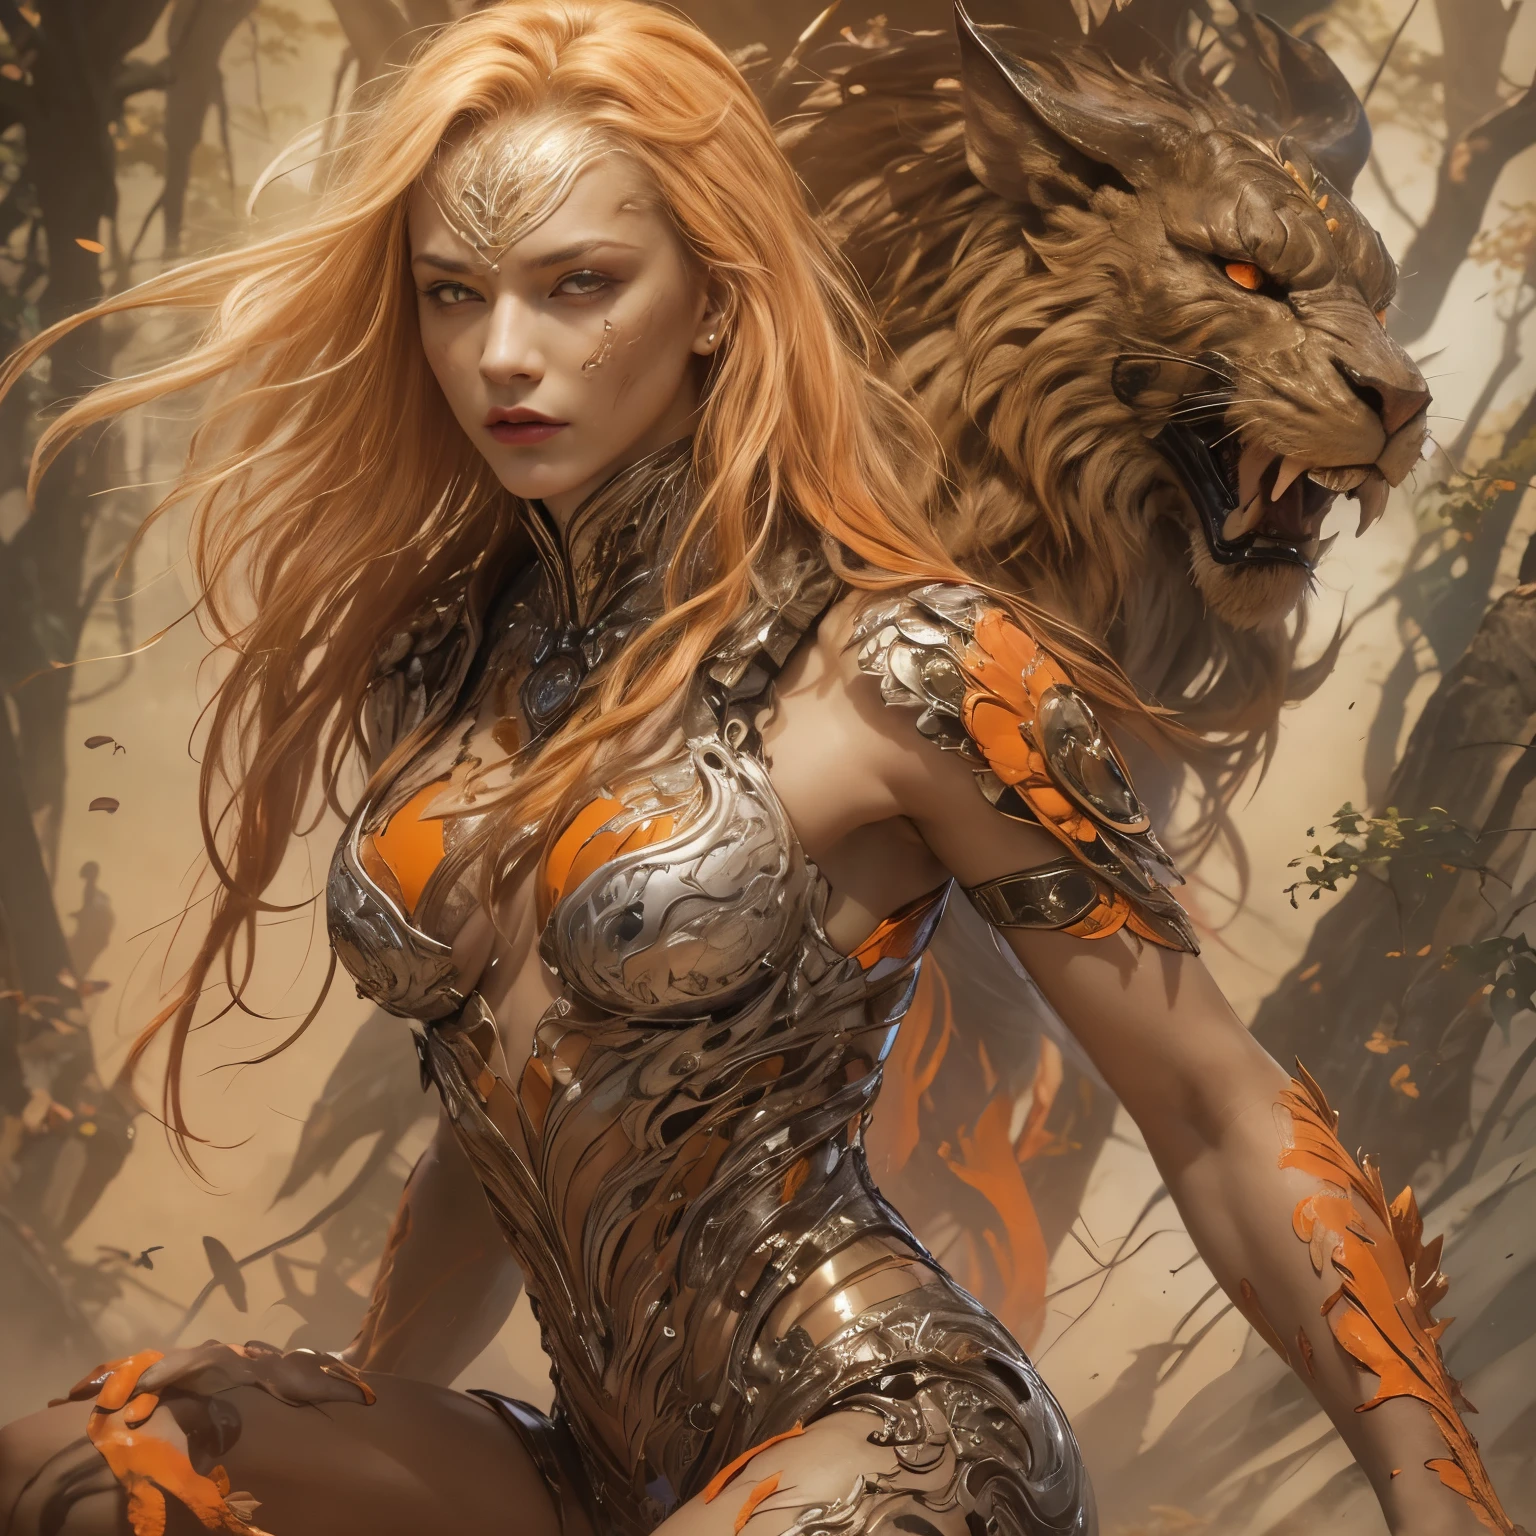 1 female alien, The predator, (extremely beautiful:1.2), (intense gaze:1.4), (predator:1.1), long dark claws, (NSFW:0.8), nipples, thick eyebrows, (shine orange eyes:1.5), the most beautiful face in the universe, NSFW, pink blonde hair, symmetrical beautiful eyes,

A woman predator with an extremely beautiful face, her intense gaze fixed on her prey, a primal force that could not be denied.

(beautiful lean body:1.5), (muscular build:1.2), (prowling:1.3), (sleek movements:1.4)

Her beautiful body, muscular and toned, moved with sleek grace as she prowled, ready to strike at a moment's notice. The predator within her was always on,                                                                          
                                                                                                                                                               
 cinematic drawing of characters, ultra high quality model, cinematic quality, detail up, (Intricate details:1.2), High resolution, High Definition, drawing faithfully, Official art, Unity 8K wall , 8K Portrait, Best Quality, Very High resolution, ultra detailed artistic photography,